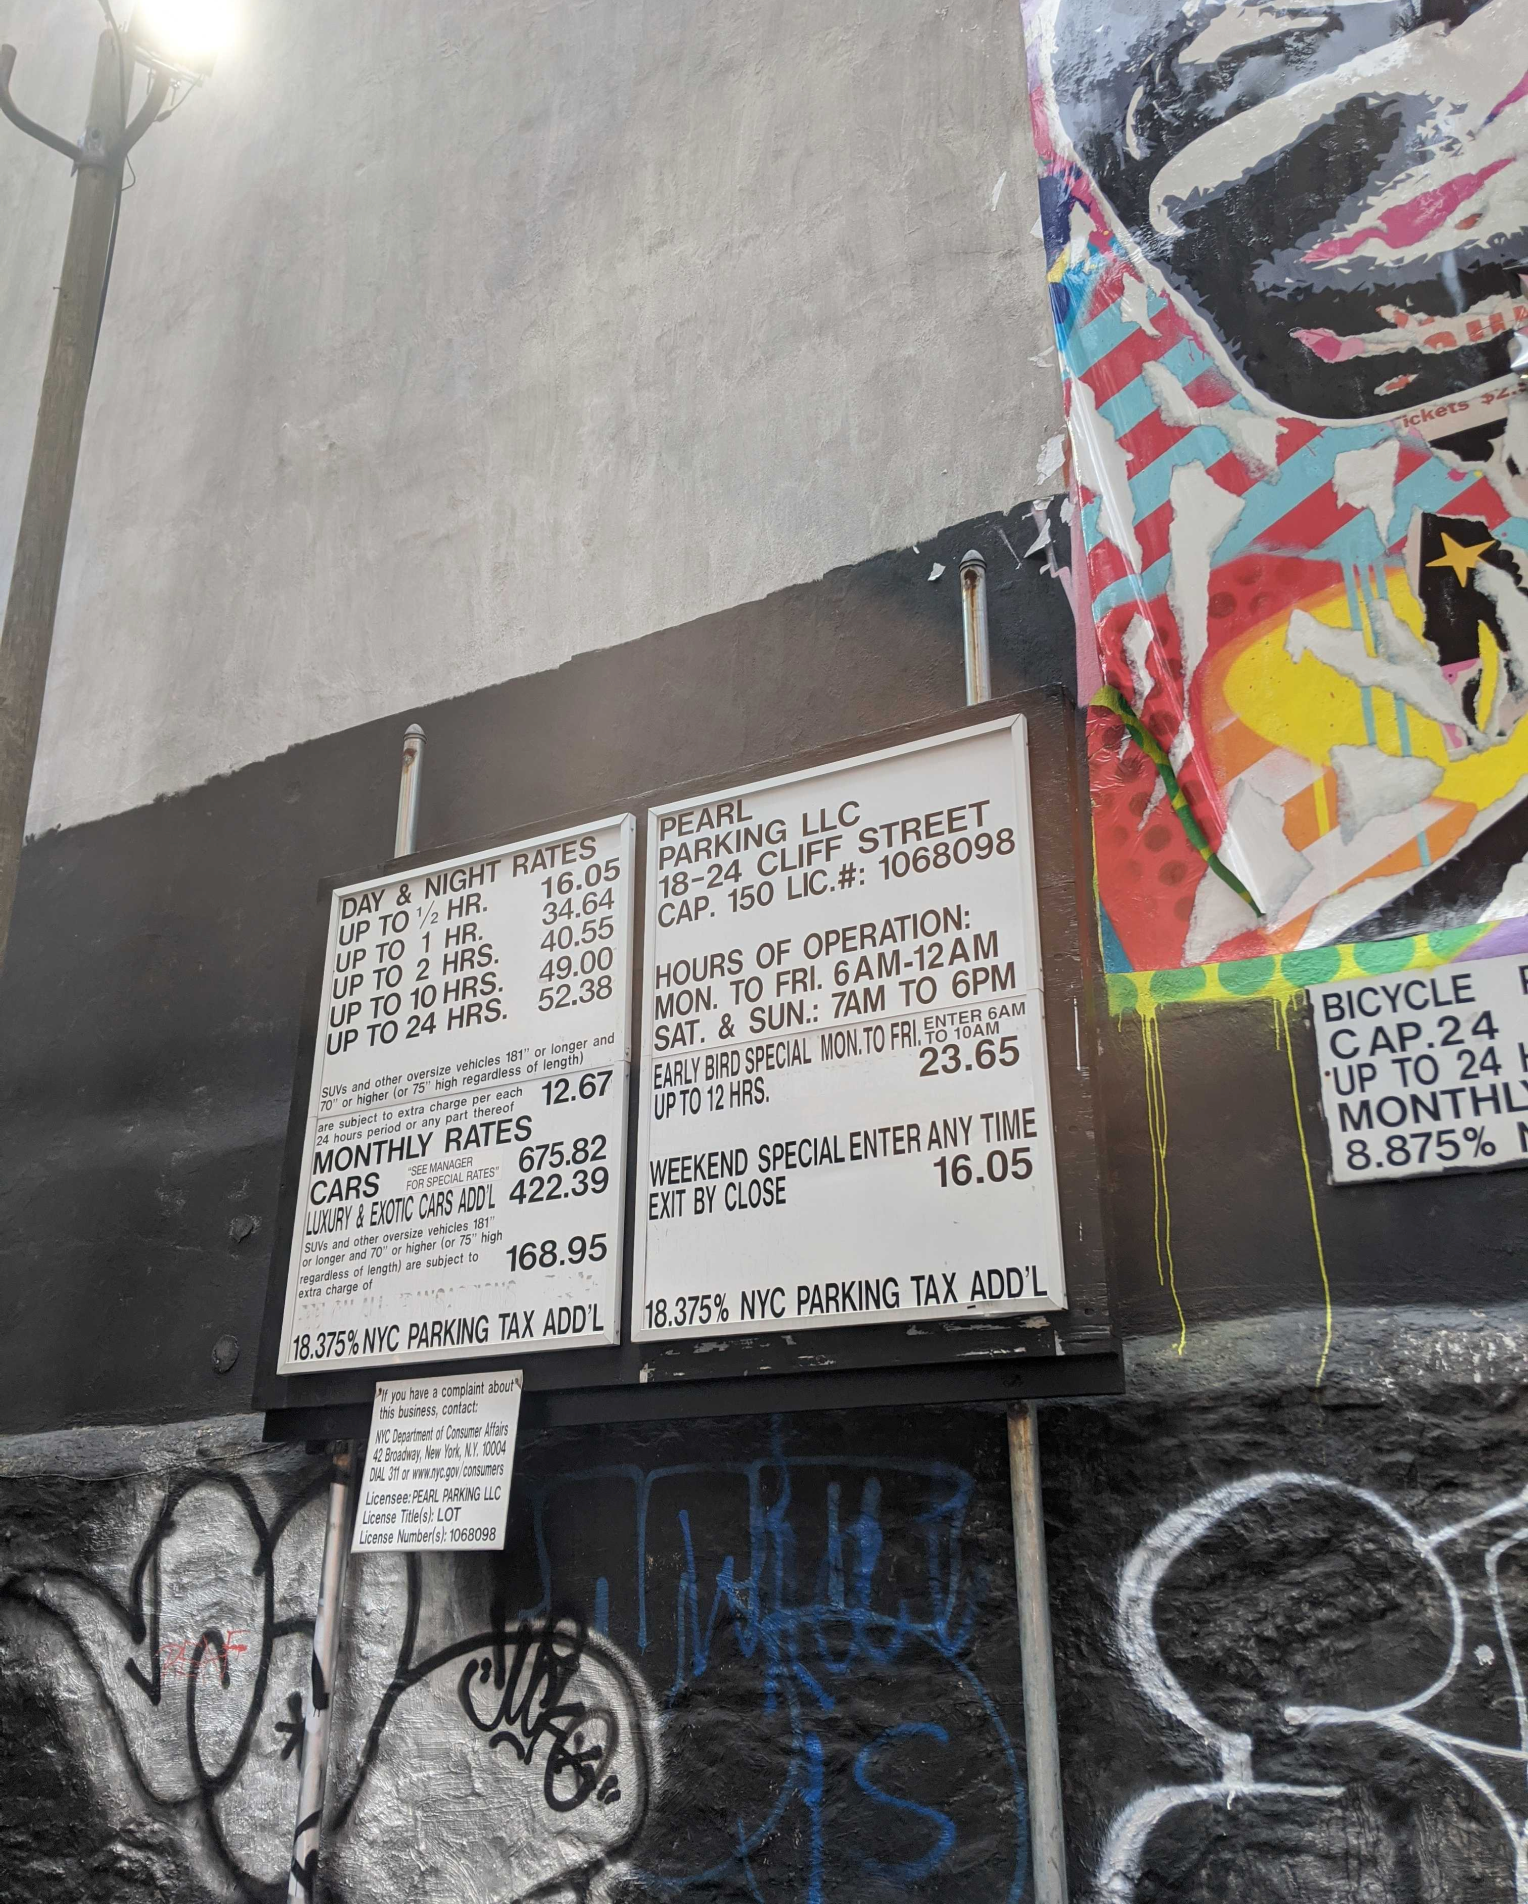 Photo of a New York garage's rates and information